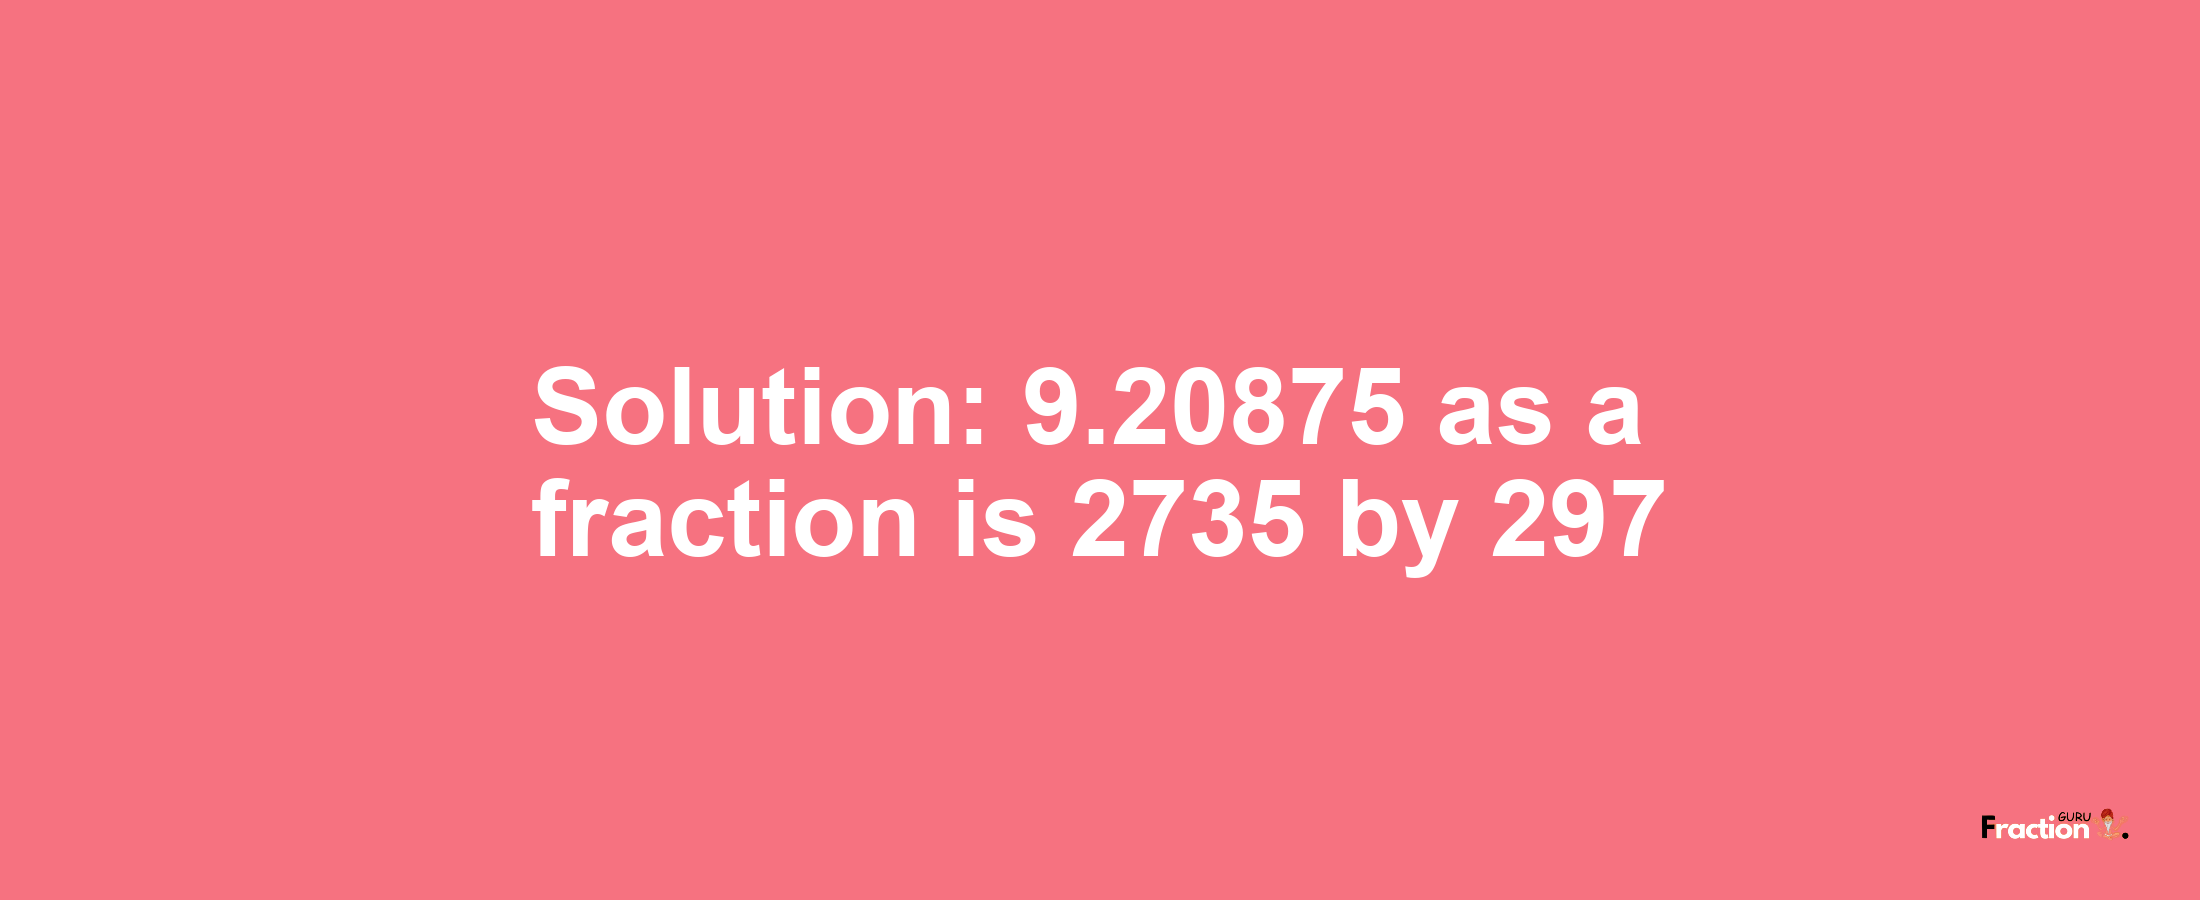 Solution:9.20875 as a fraction is 2735/297